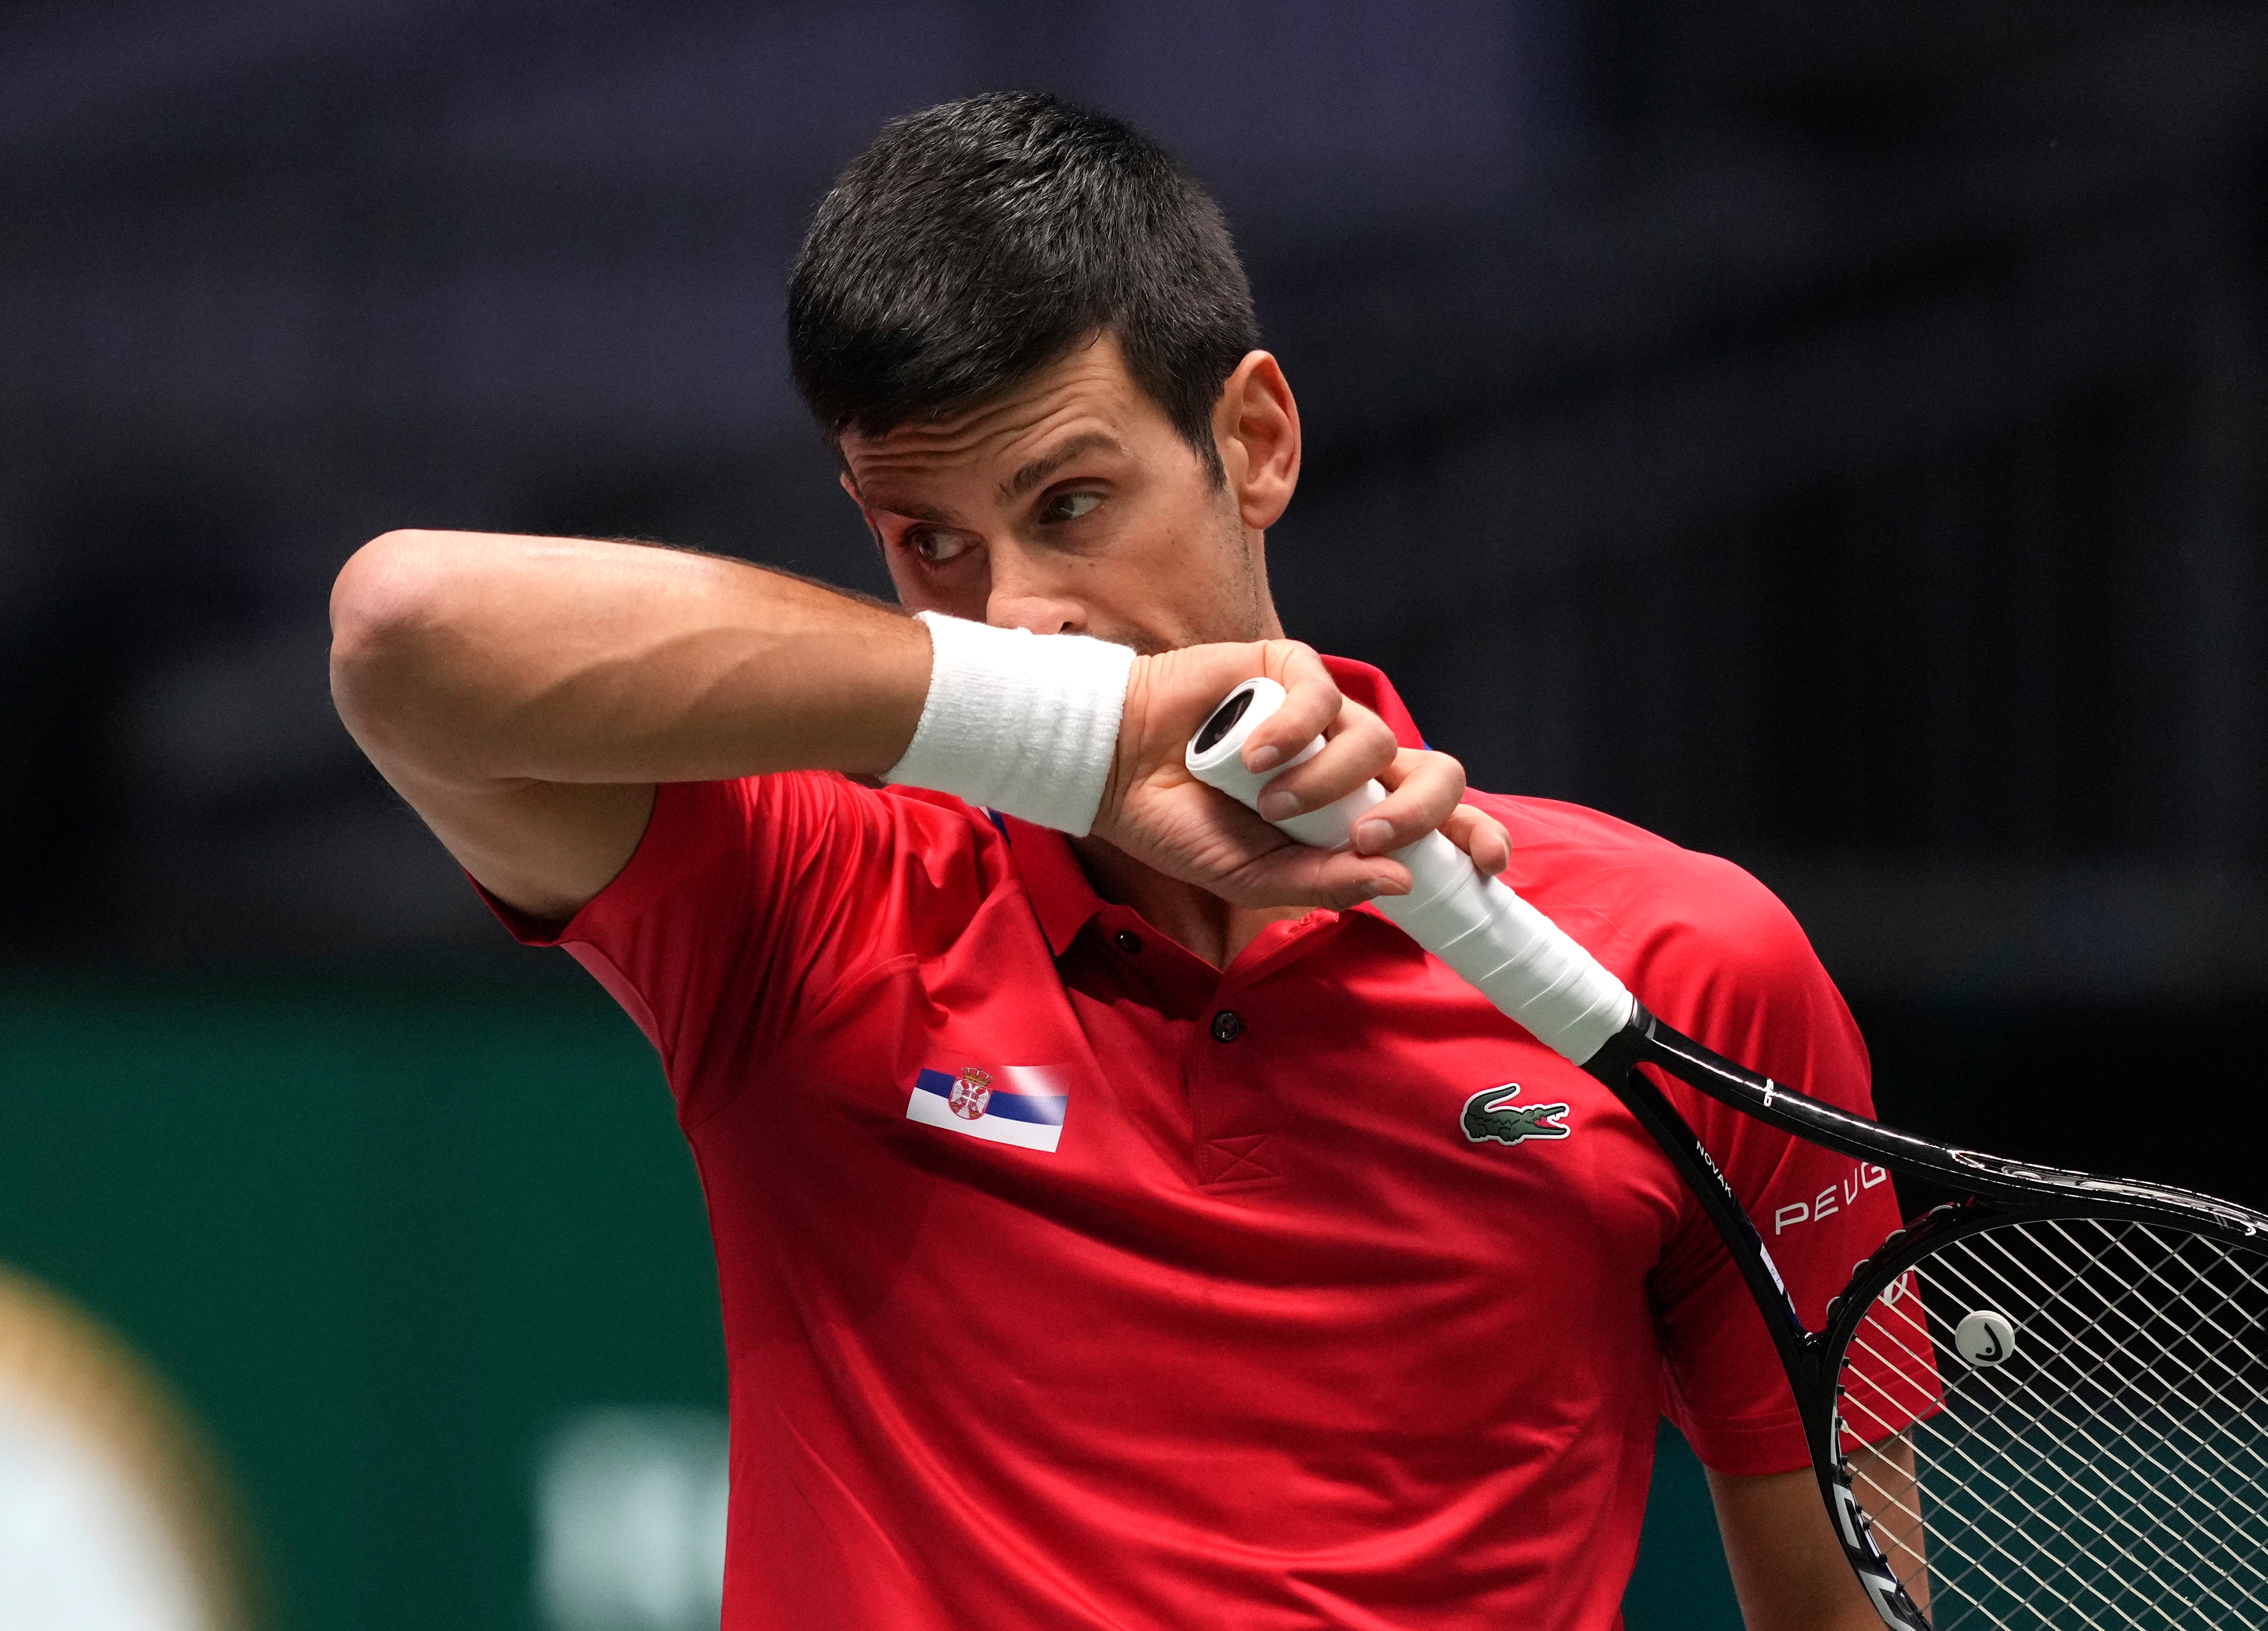 Novak Djokovic was unable to guide Serbia to victory (Michael Probst/AP)